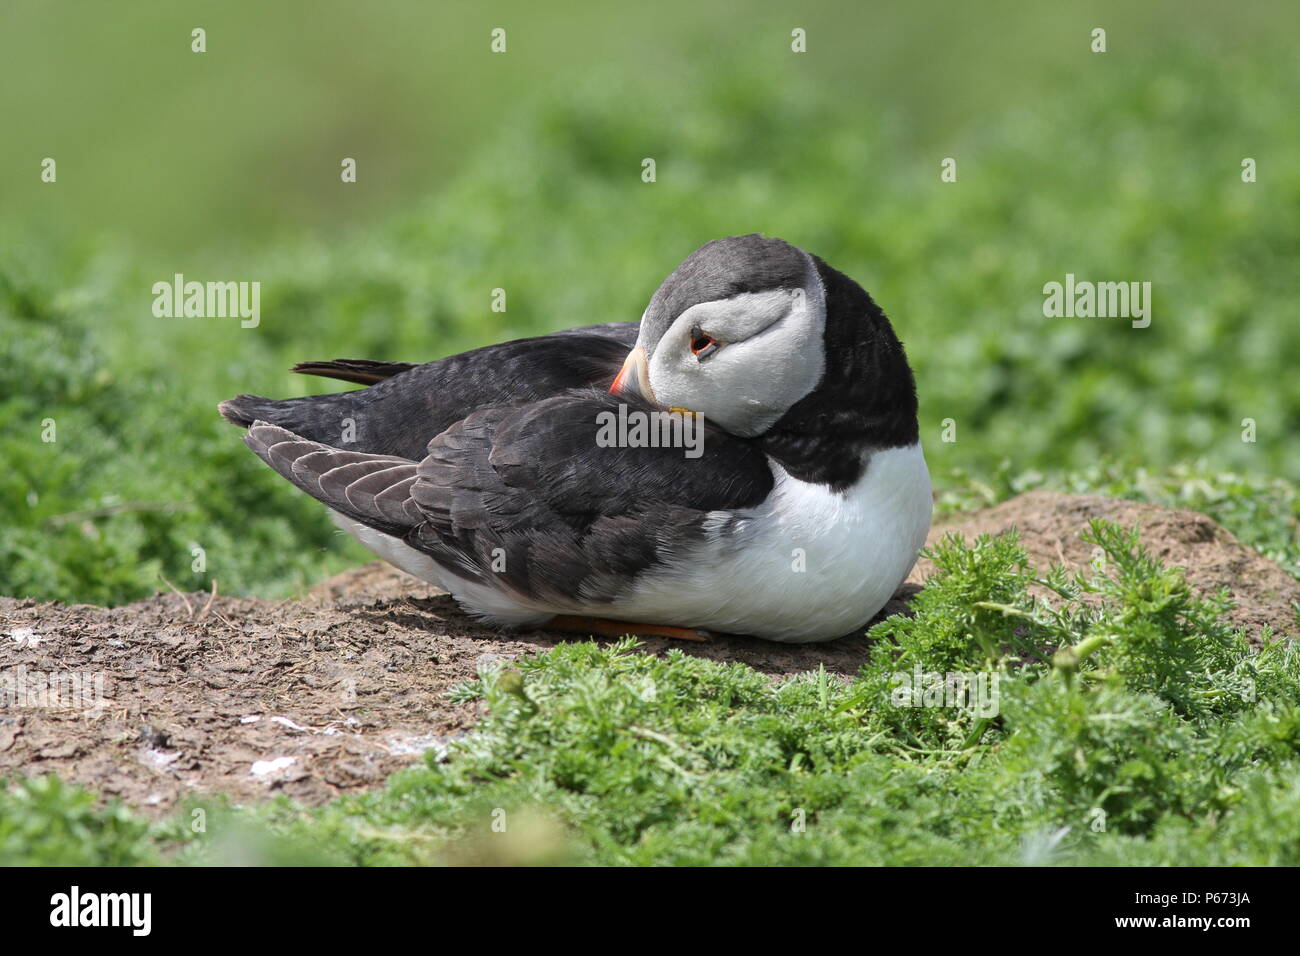 Fratercula arctica, Puffin at rest, sleeping with head tucked into back Stock Photo